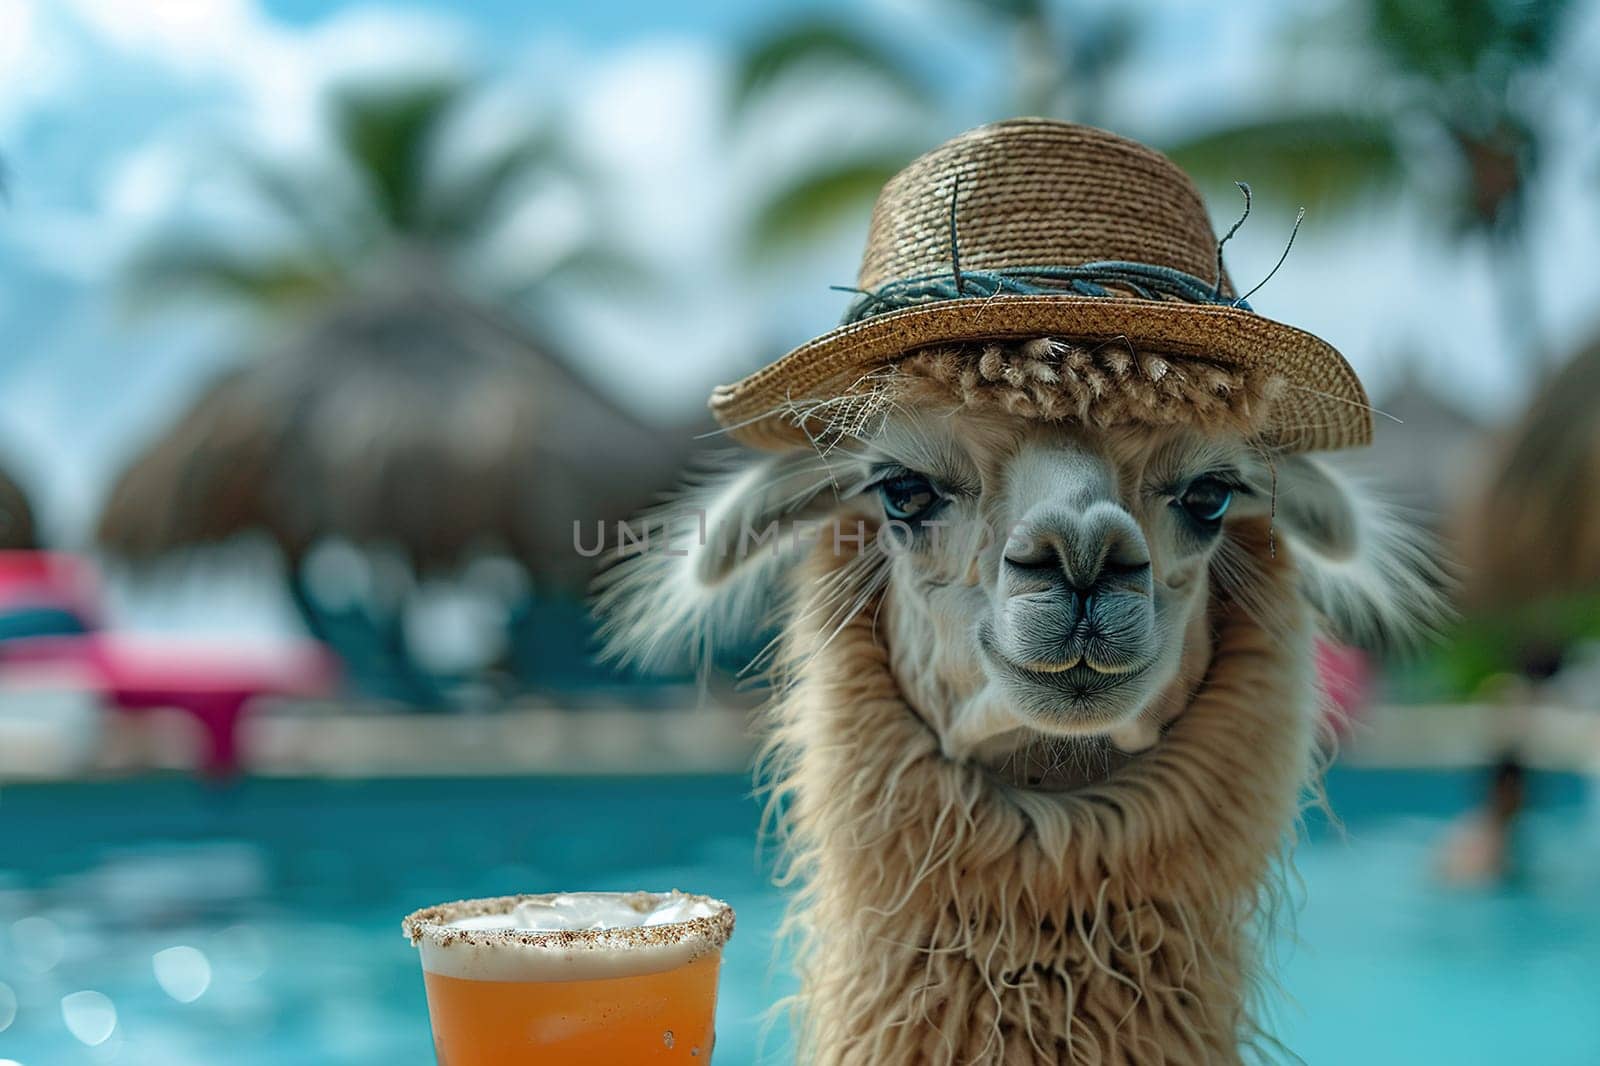 Llama in a brimmed hat and a cocktail at the resort. Vacation concept.